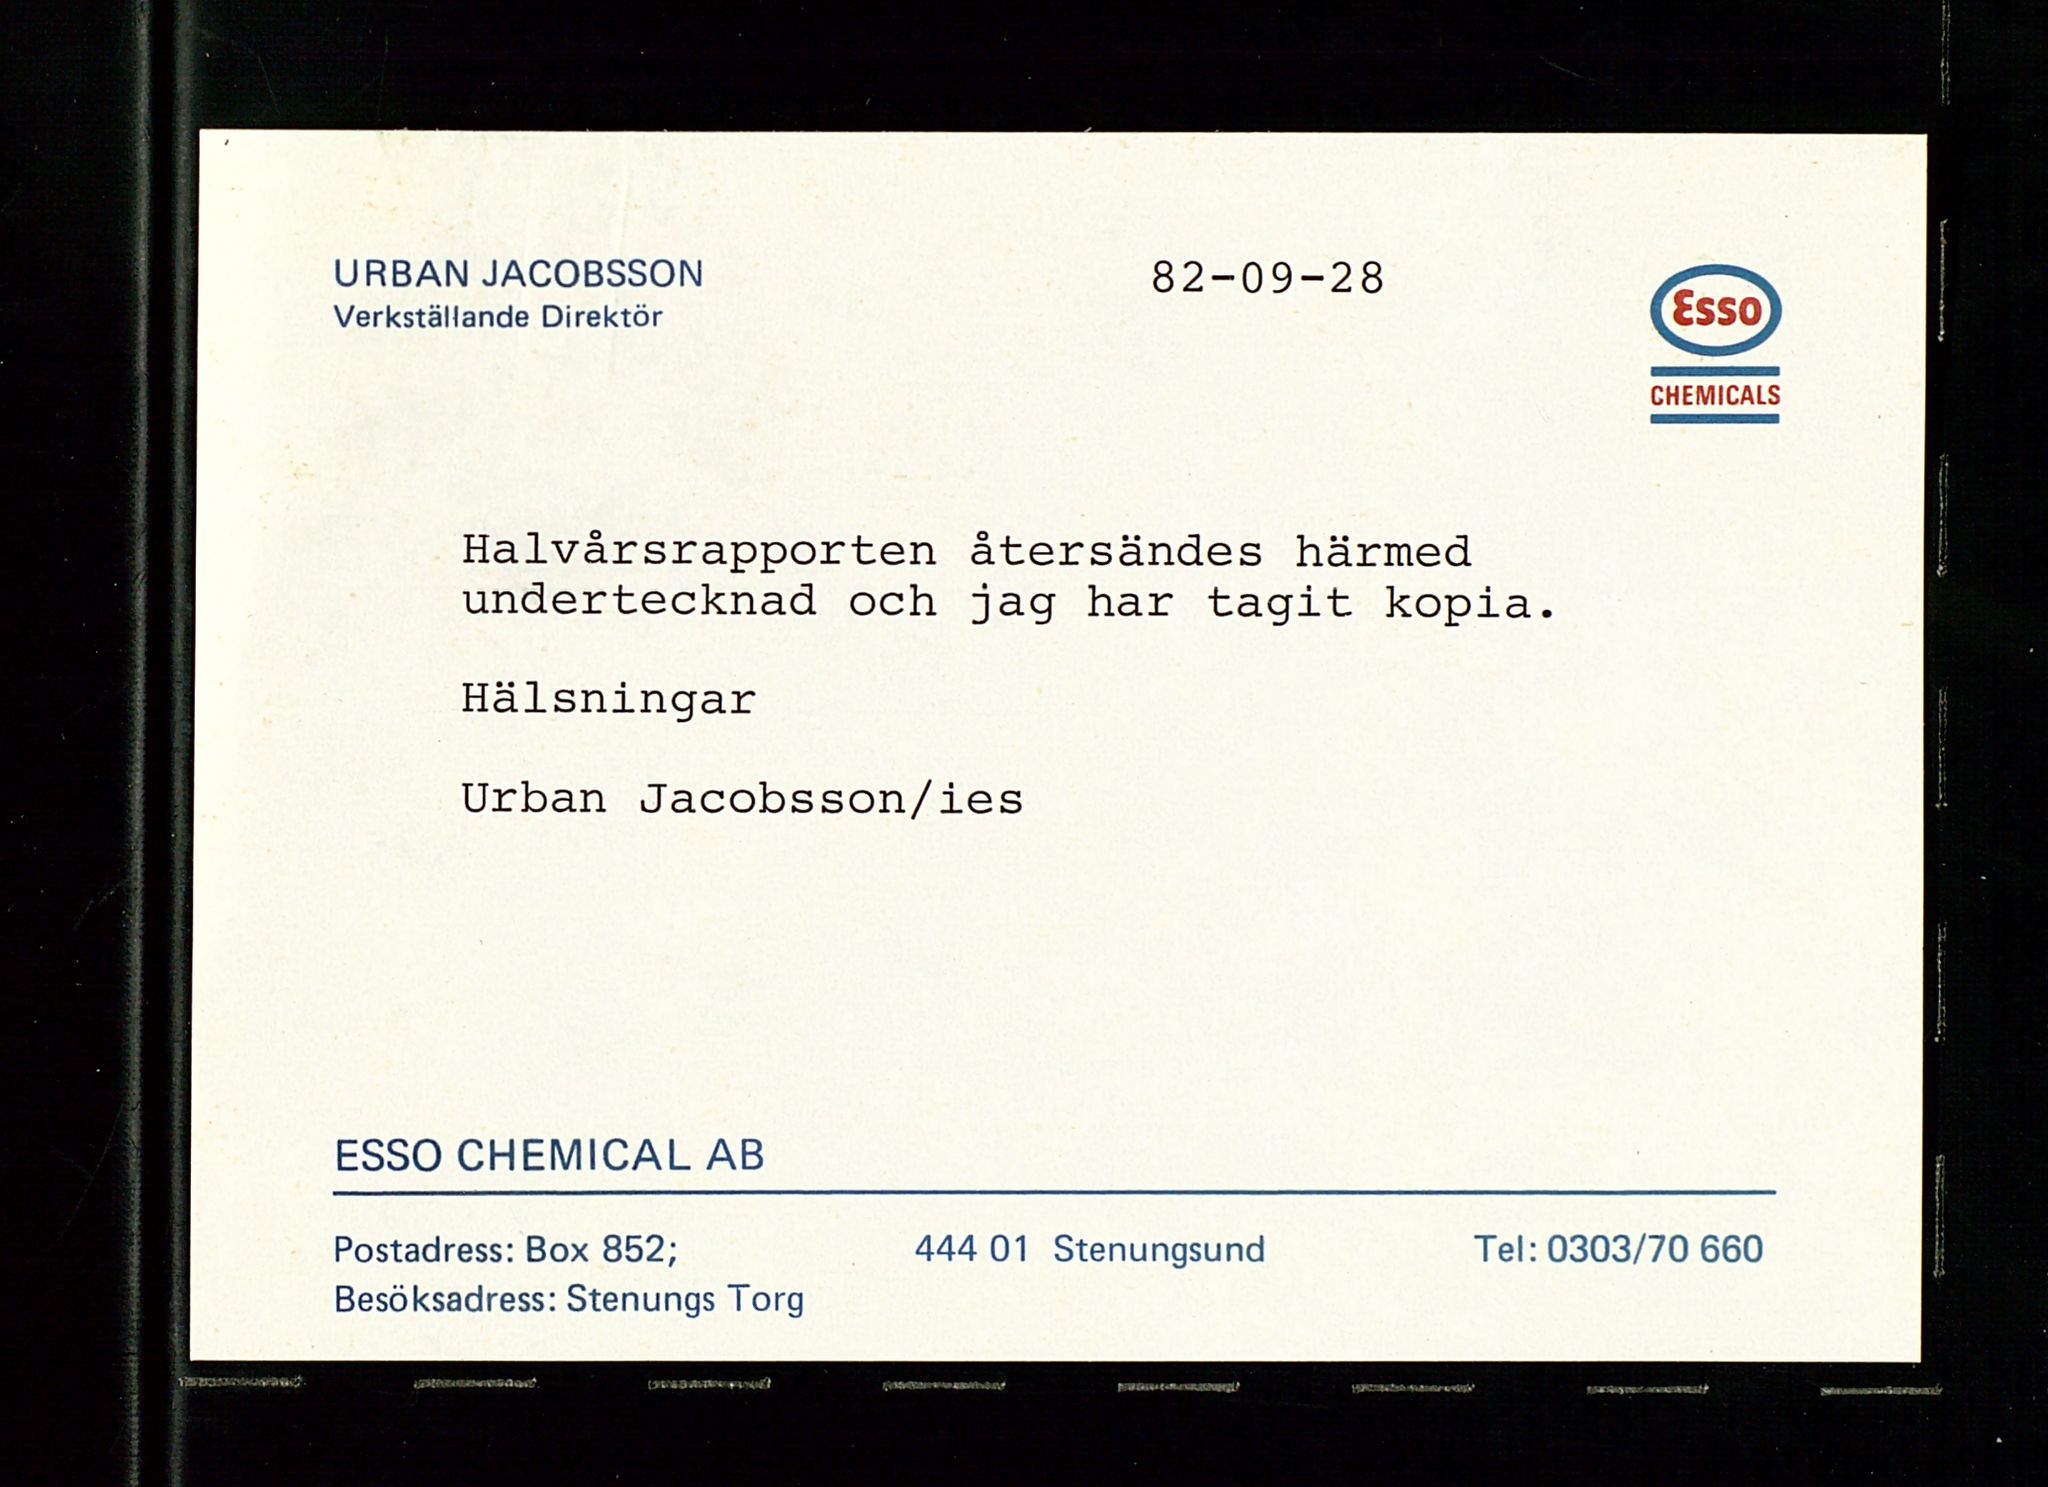 PA 1538 - Exxon Chemical Norge A/S, SAST/A-101958/A/Aa/L0002/0001: Styredokumenter / Halvårsrapporter 1983-1984, Generalforsamling, Styremøter og halvårsrapporter 1985-1988, 1983-1988